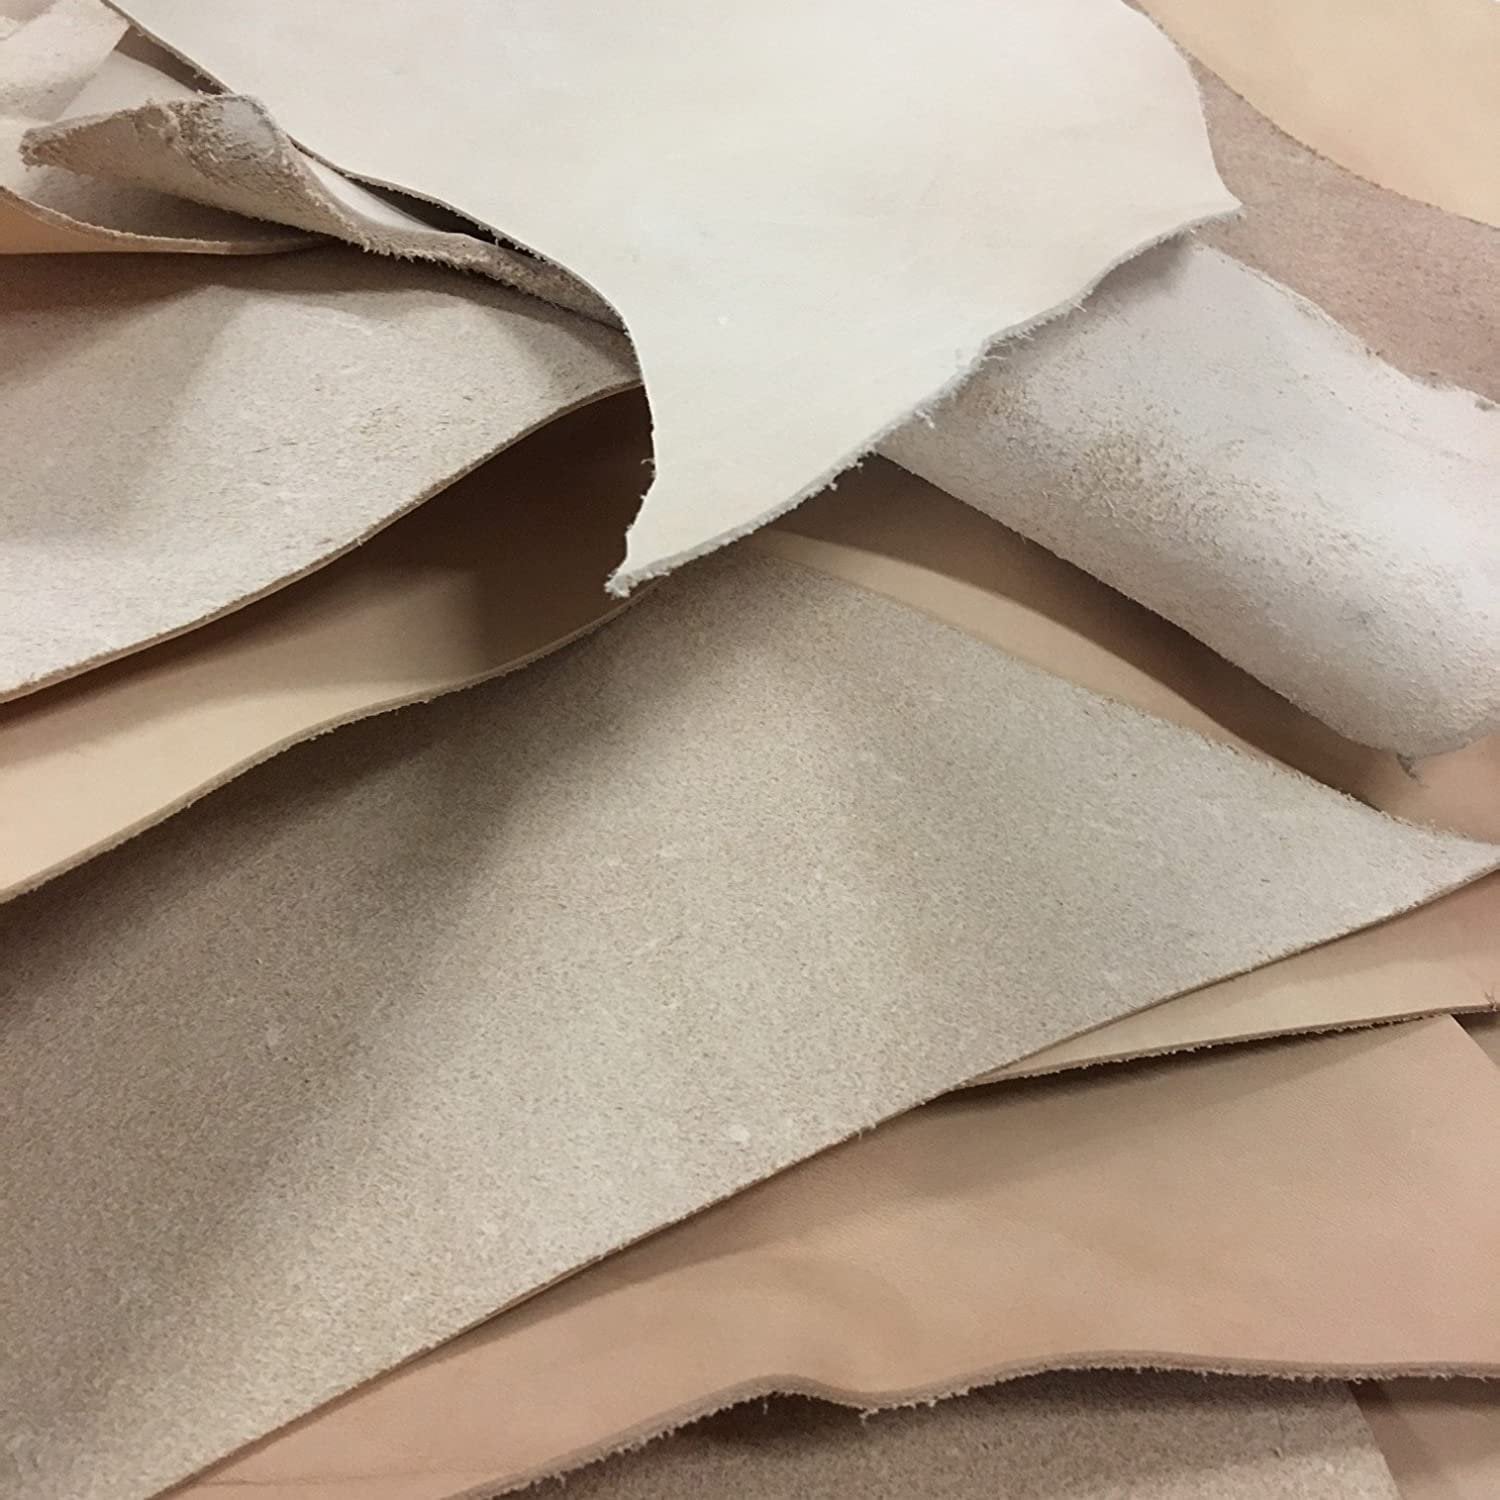 Vegetable Tanned Cowhide Leather Remnants and Scrap 2lbs